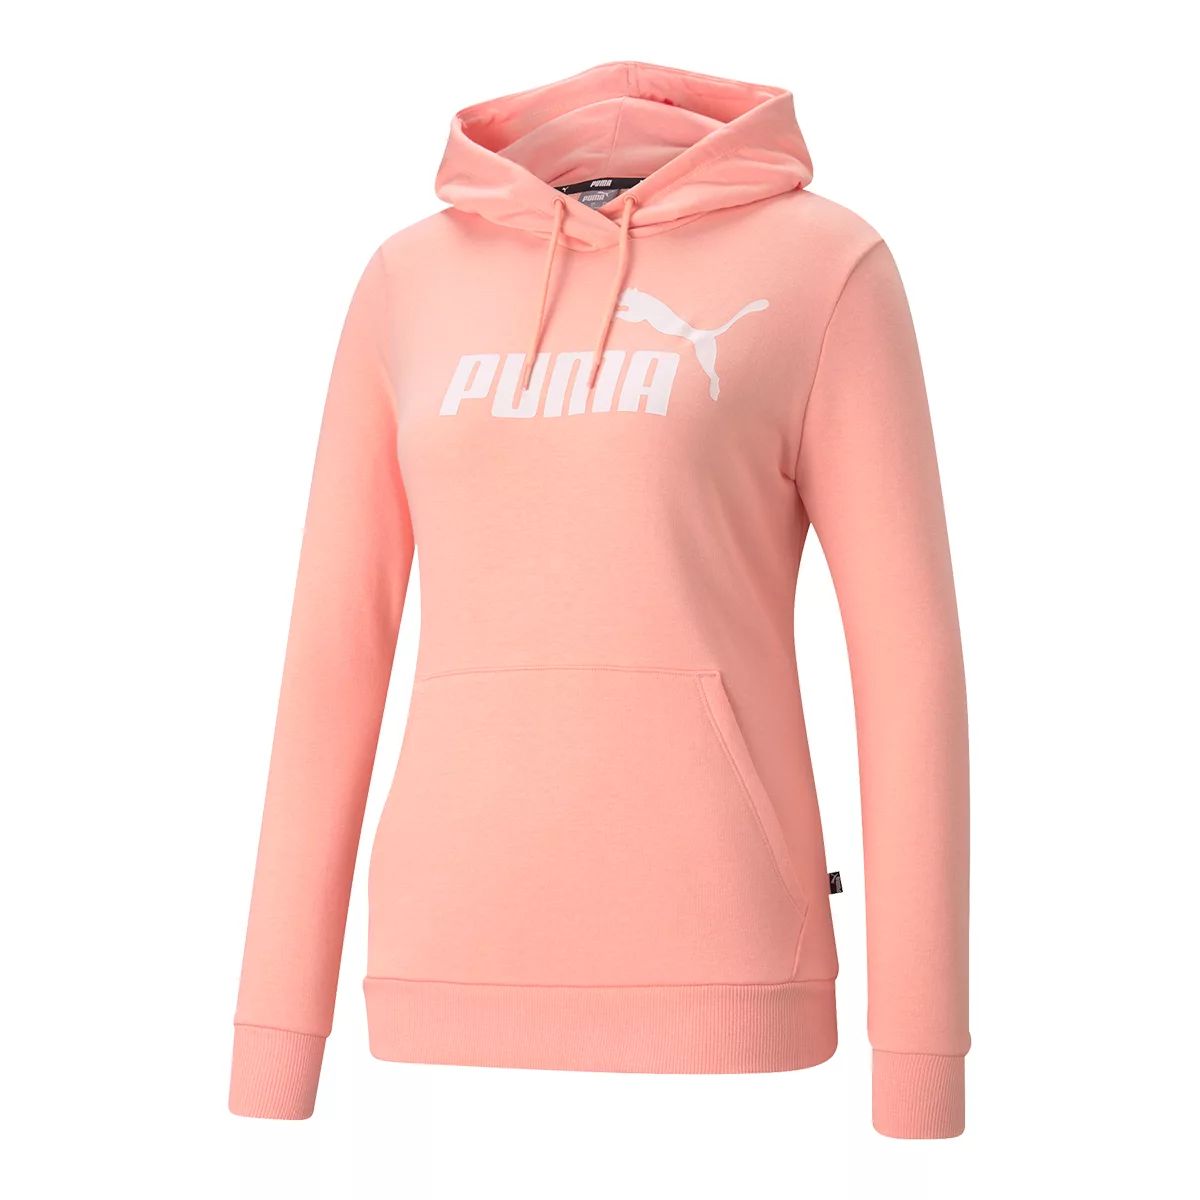 https://media-www.atmosphere.ca/product/div-03-softgoods/dpt-70-athletic-clothing/sdpt-02-womens/333367267/puma-w-sw-ess-logo-hoody-q22-peach-xs--797d4e00-2bed-43f5-a0d2-2dbf2f87a9ea-jpgrendition.jpg?imdensity=1&imwidth=640&impolicy=mZoom